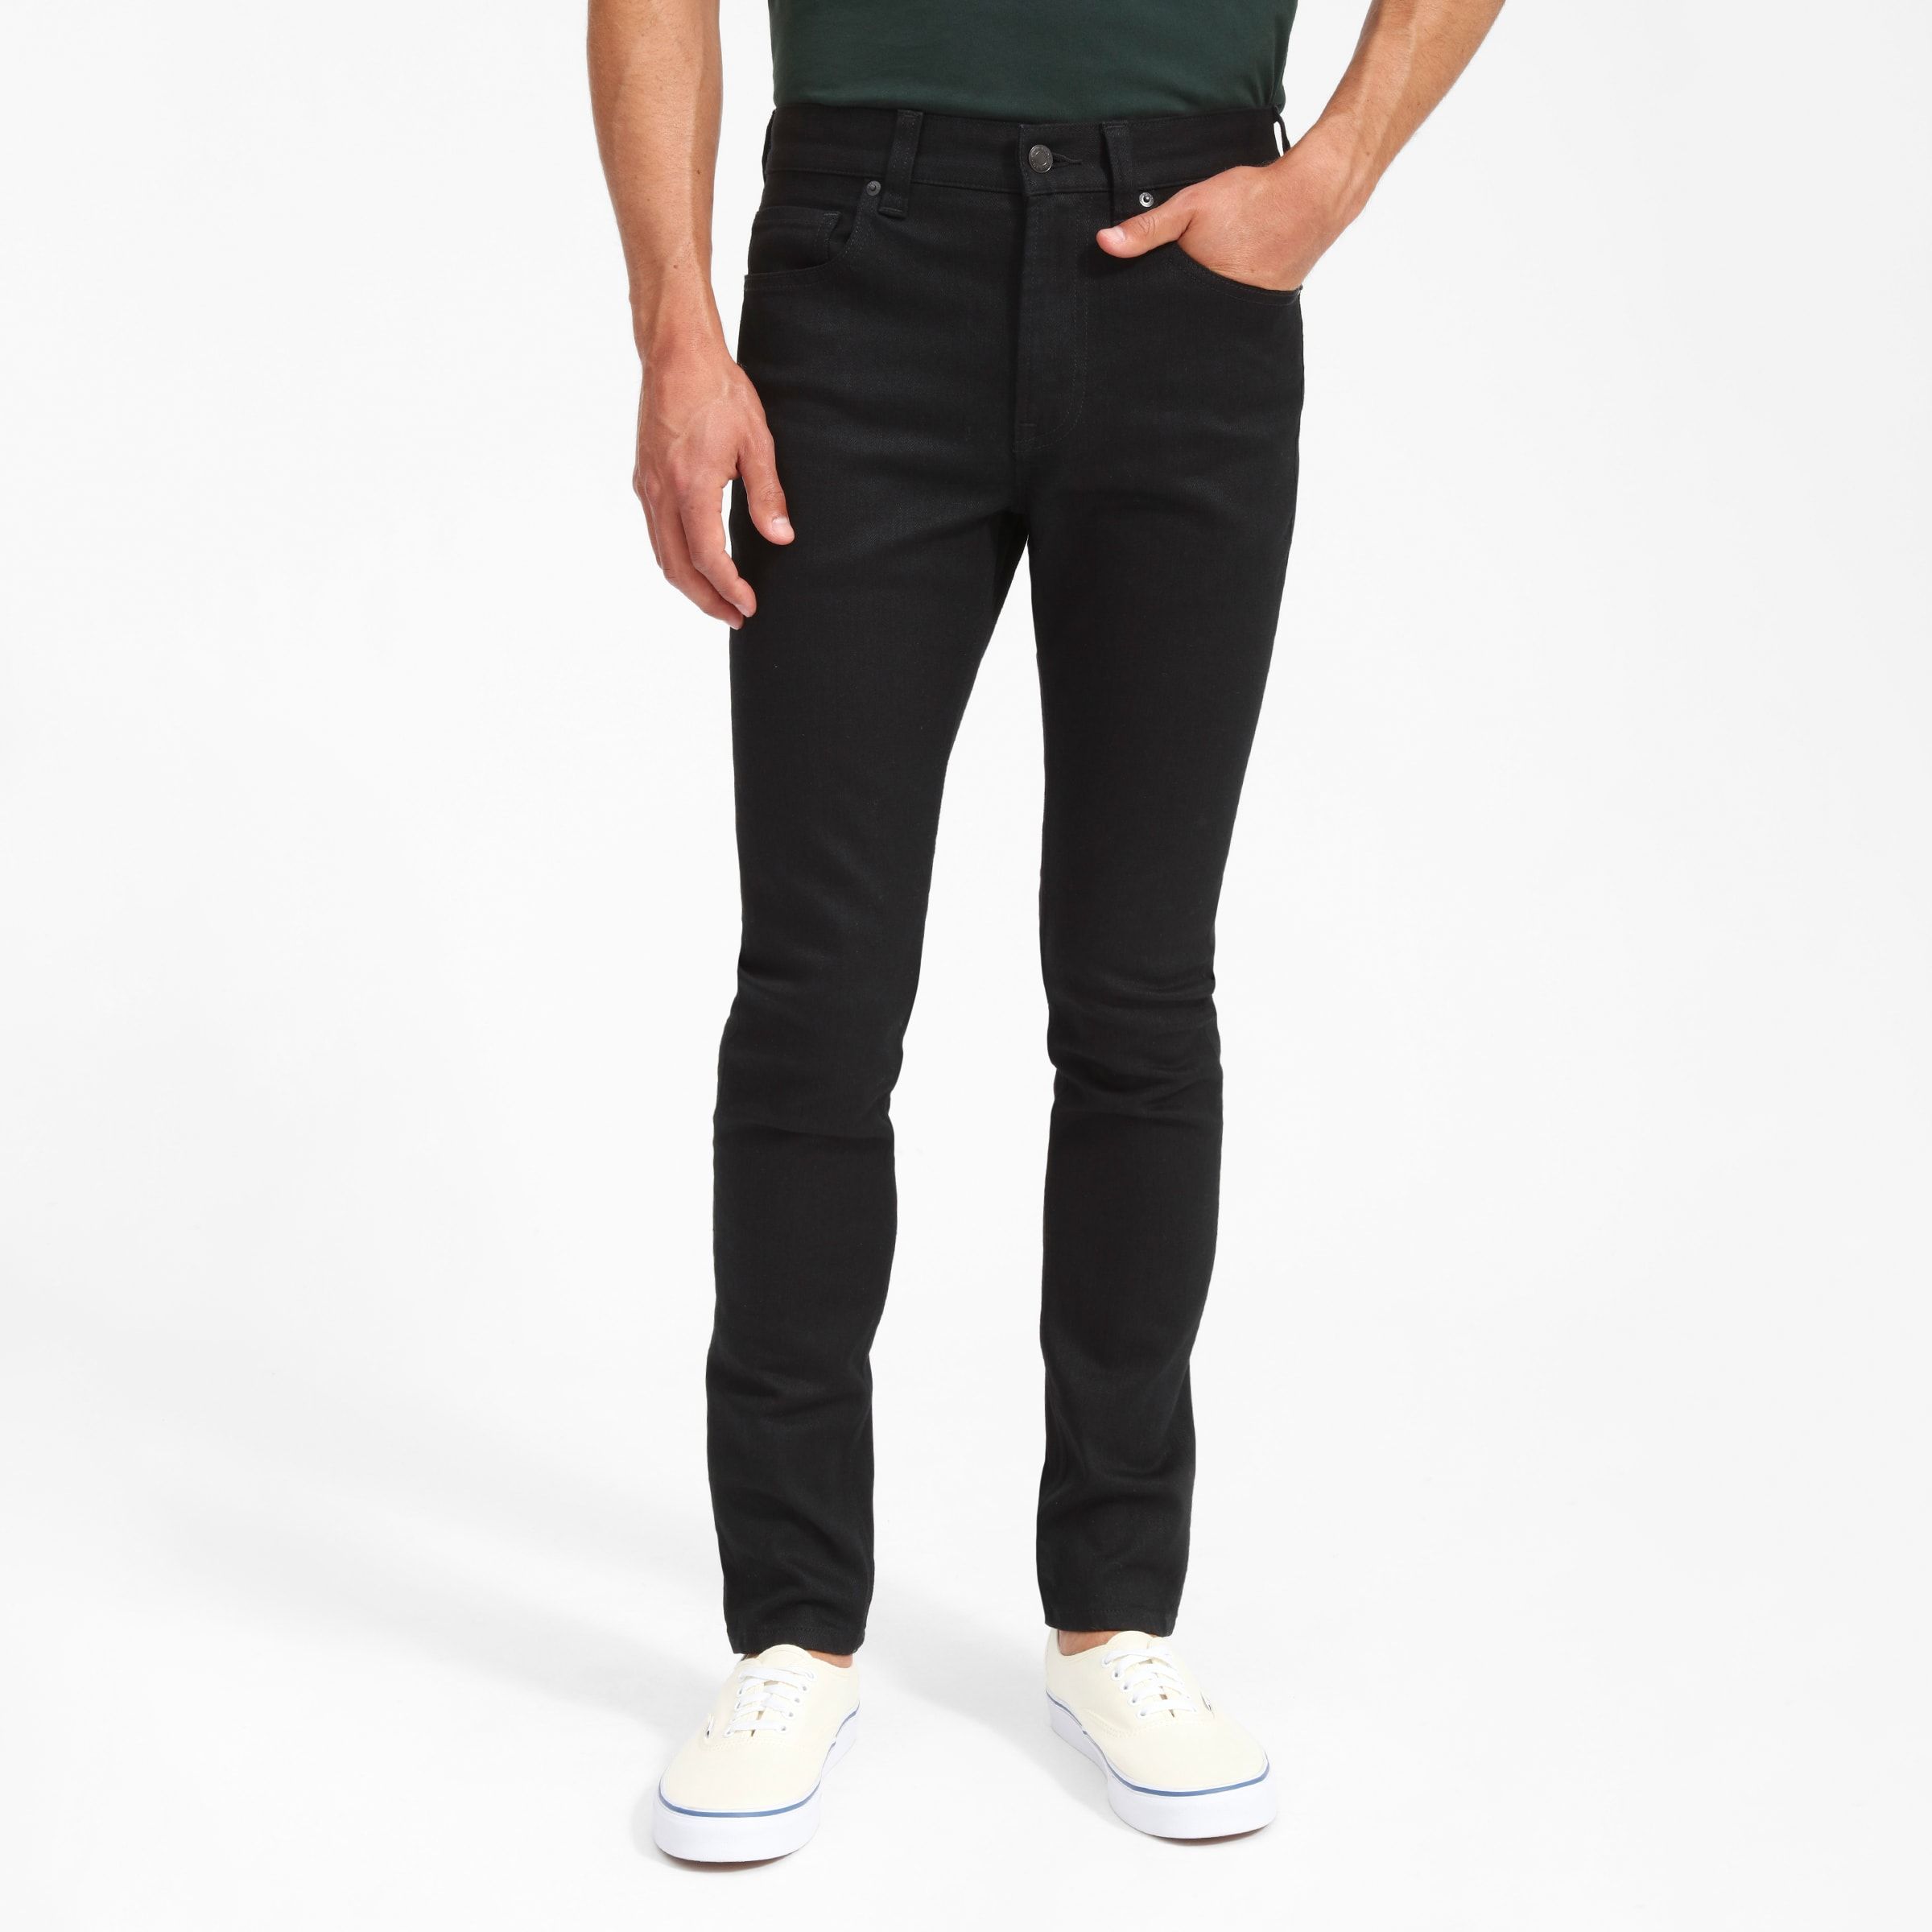 Everlane The Skinny Fit Jeans